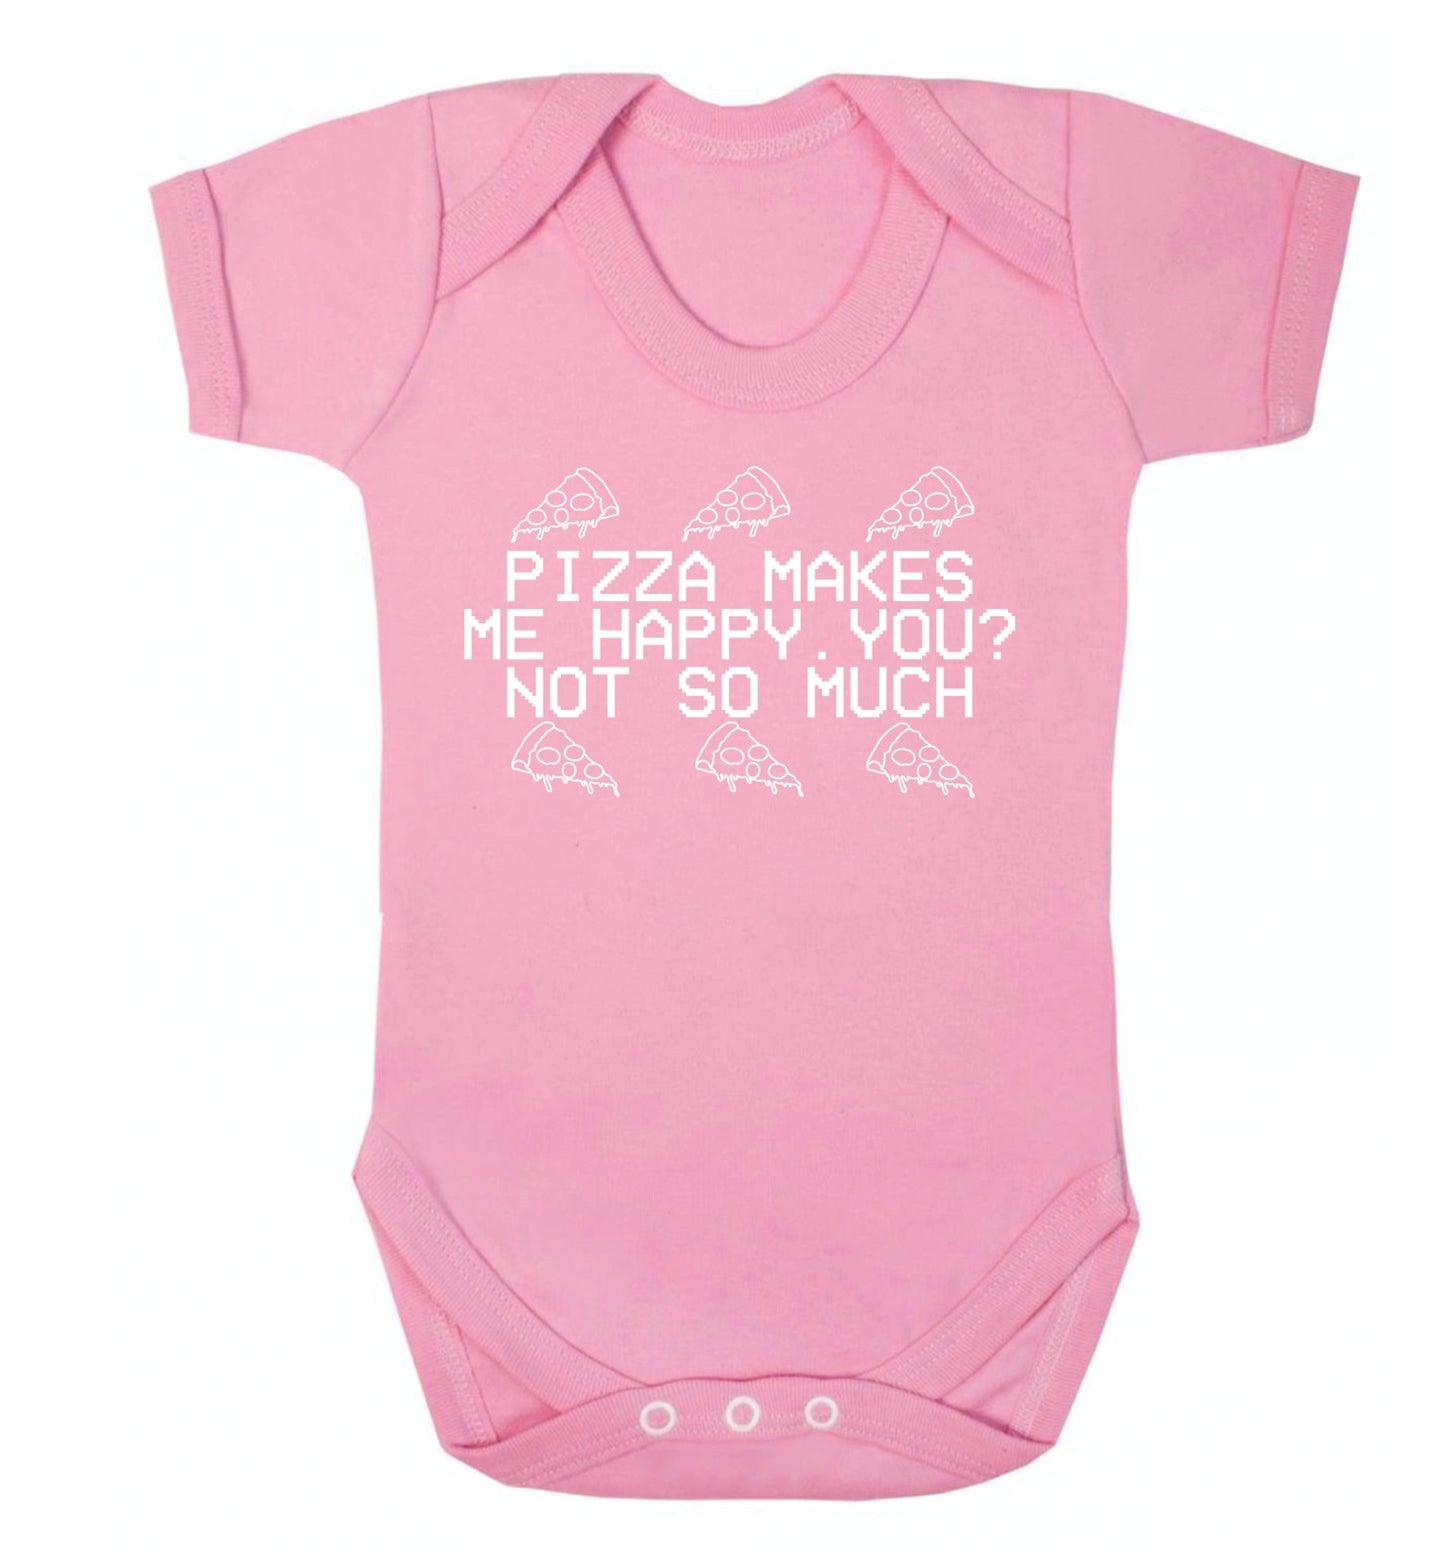 Pizza makes me happy, You? Not so much Baby Vest pale pink 18-24 months